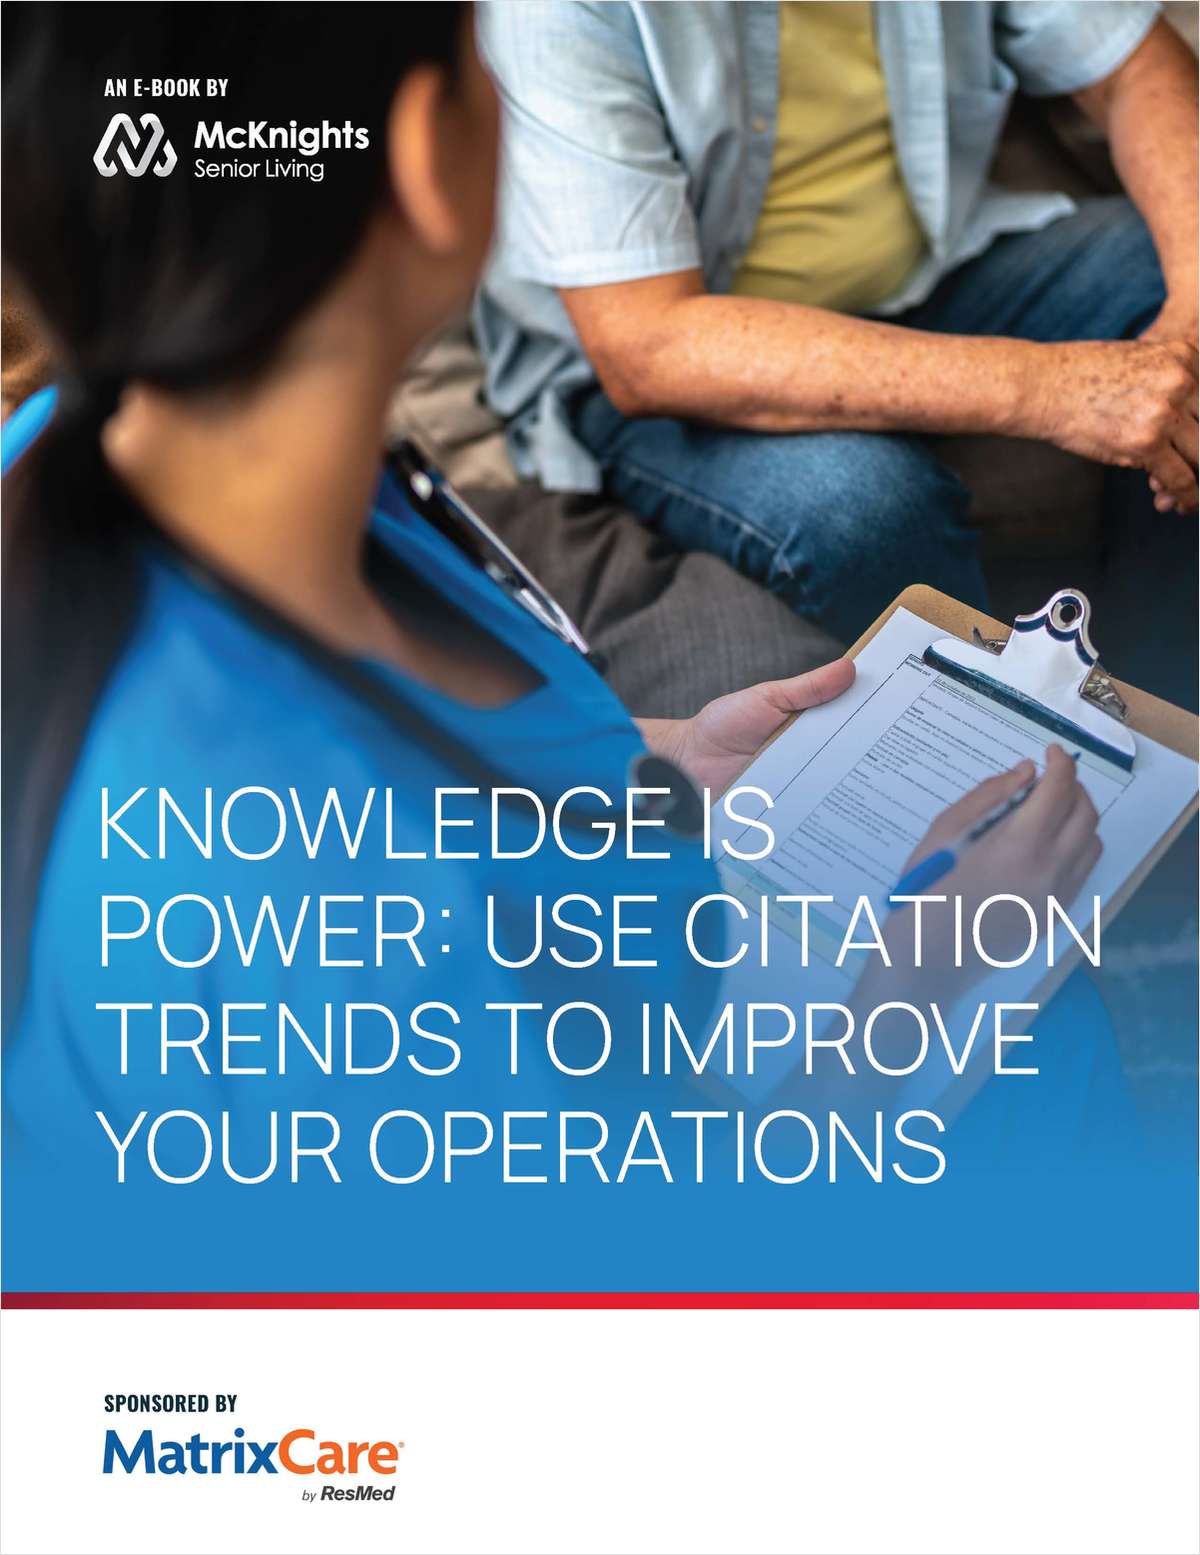 Knowledge is power: Use citation trends to improve your operations